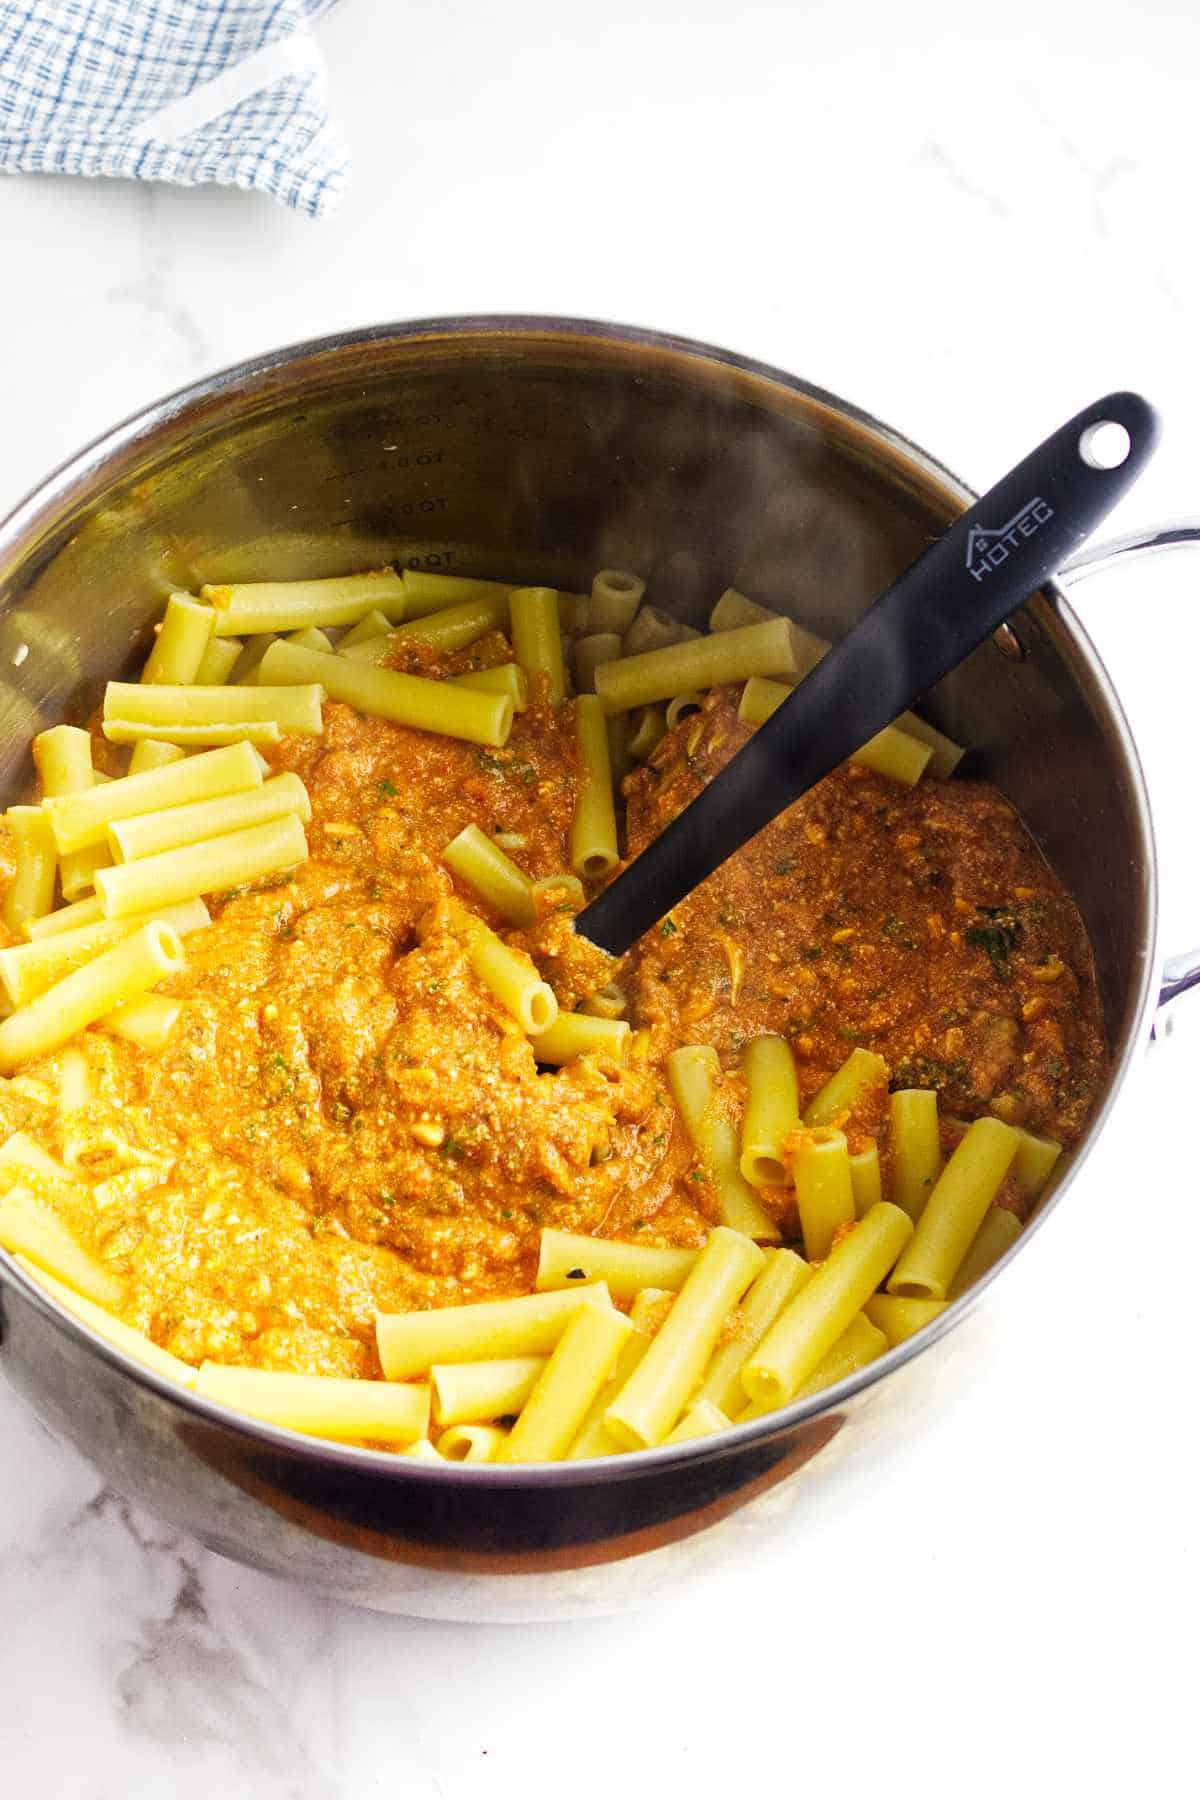 pasta and cheese sauce mixed with freshly cooked ziti pasta in a bowl.